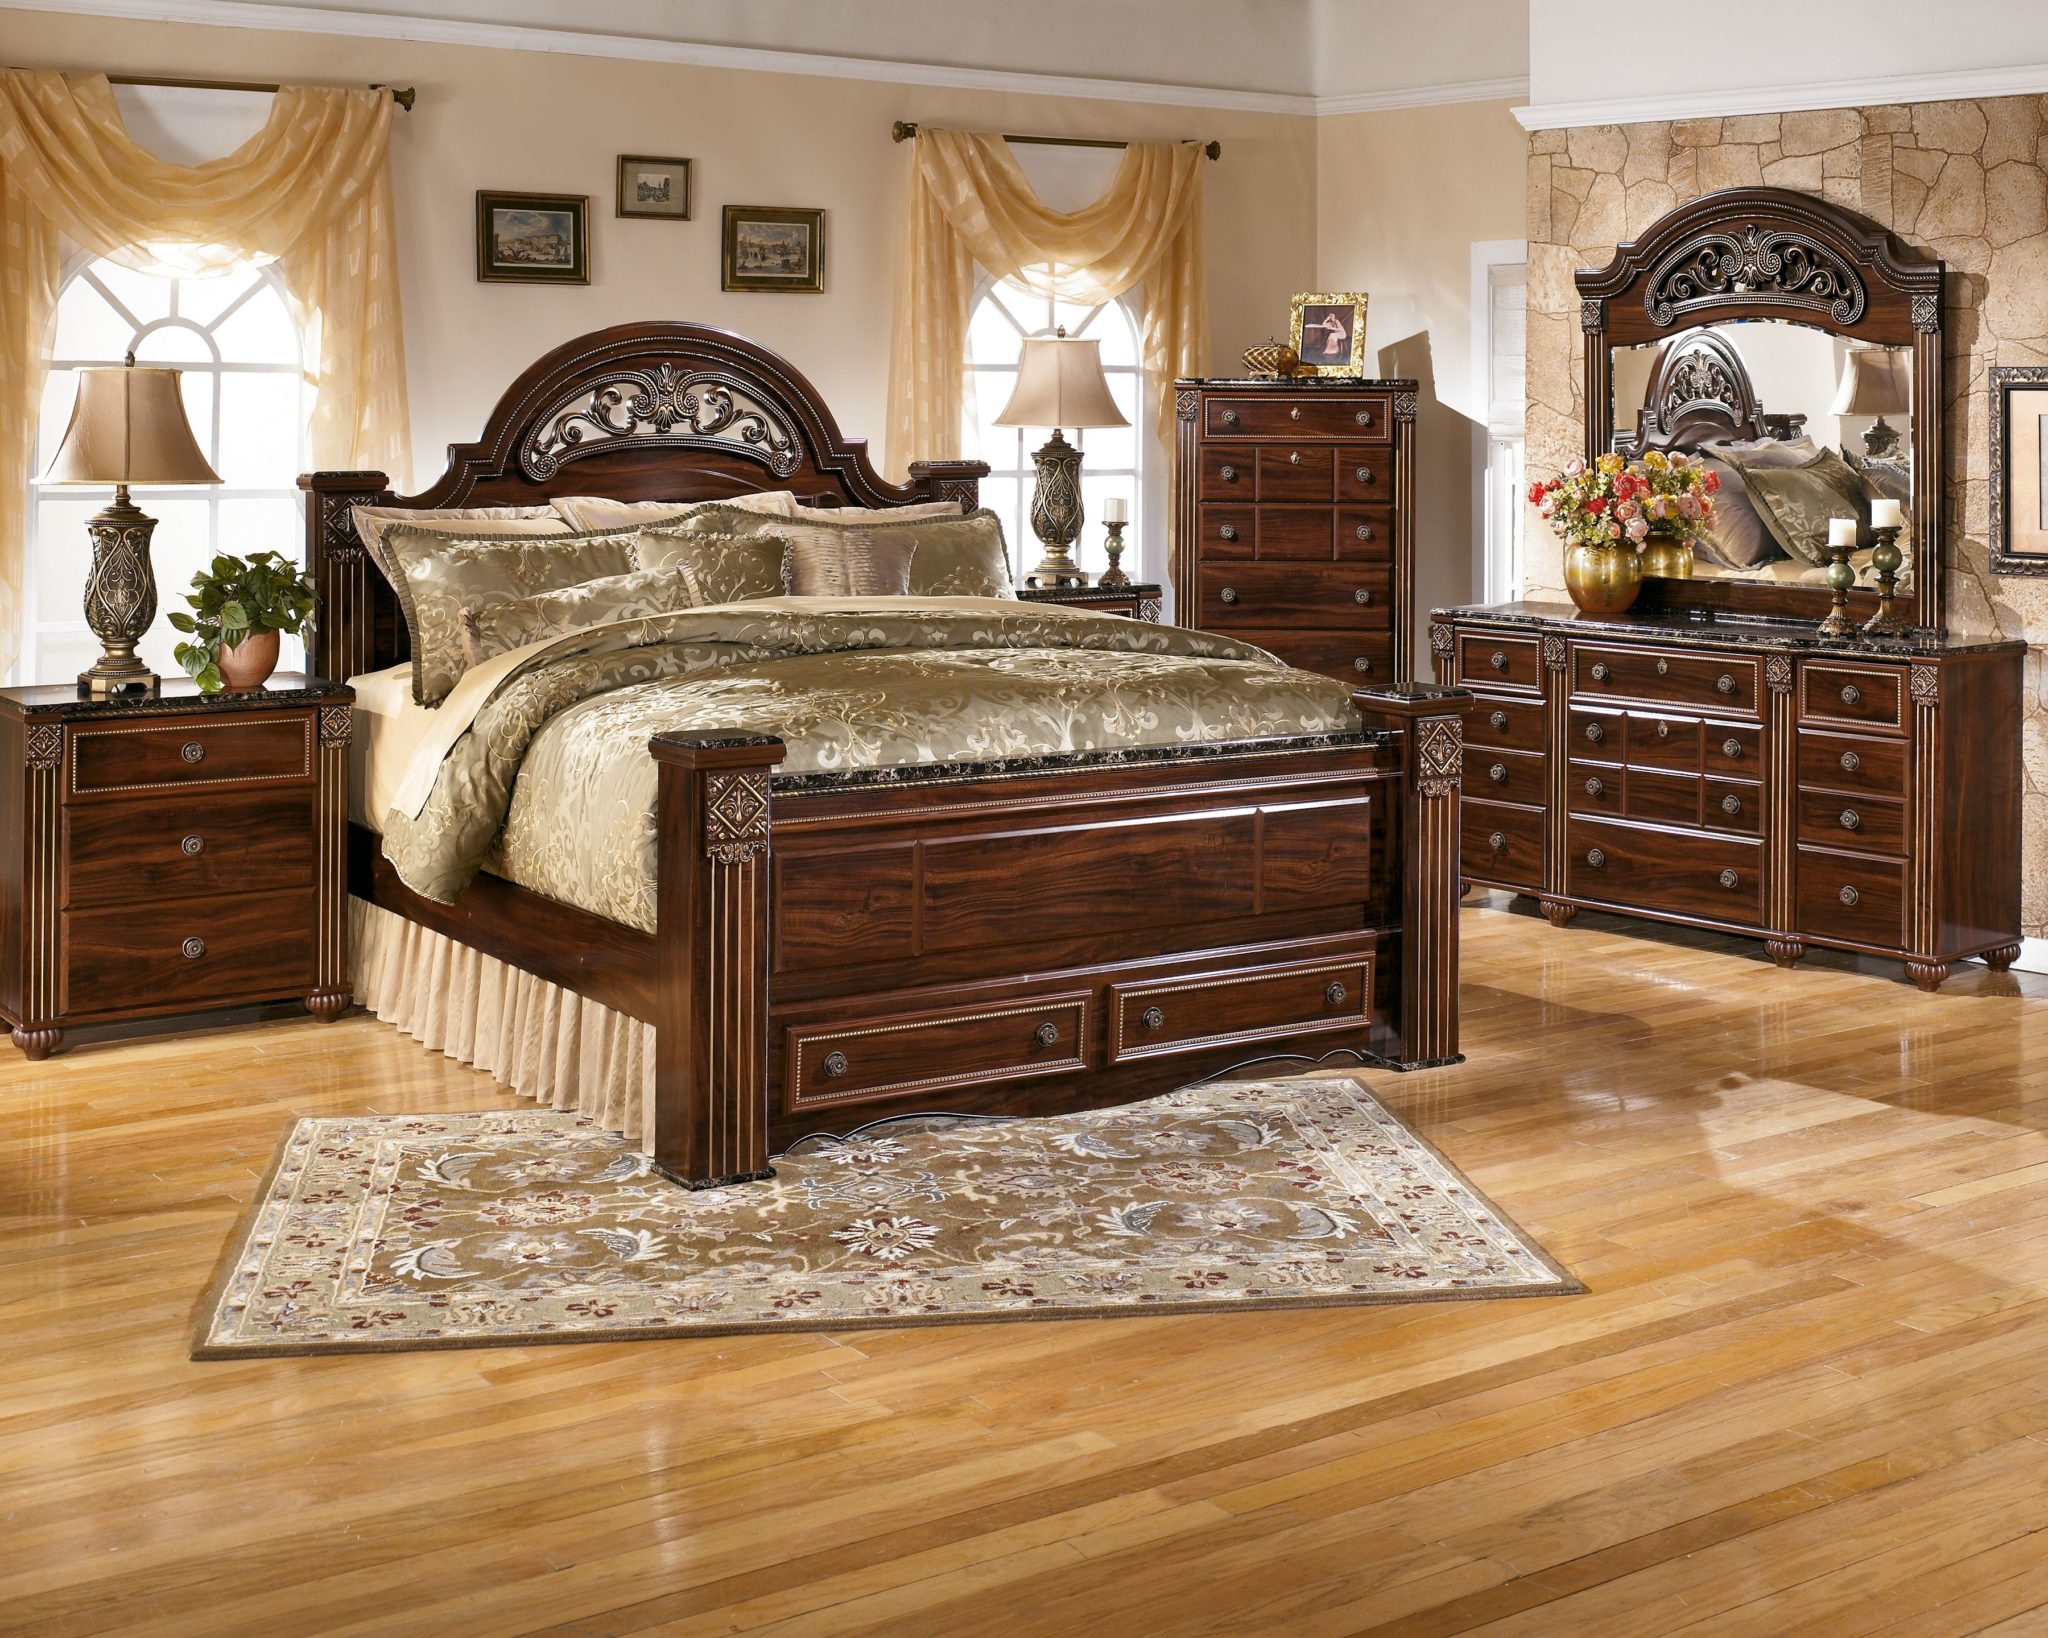 ashley bedroom furniture set with drawers under bed